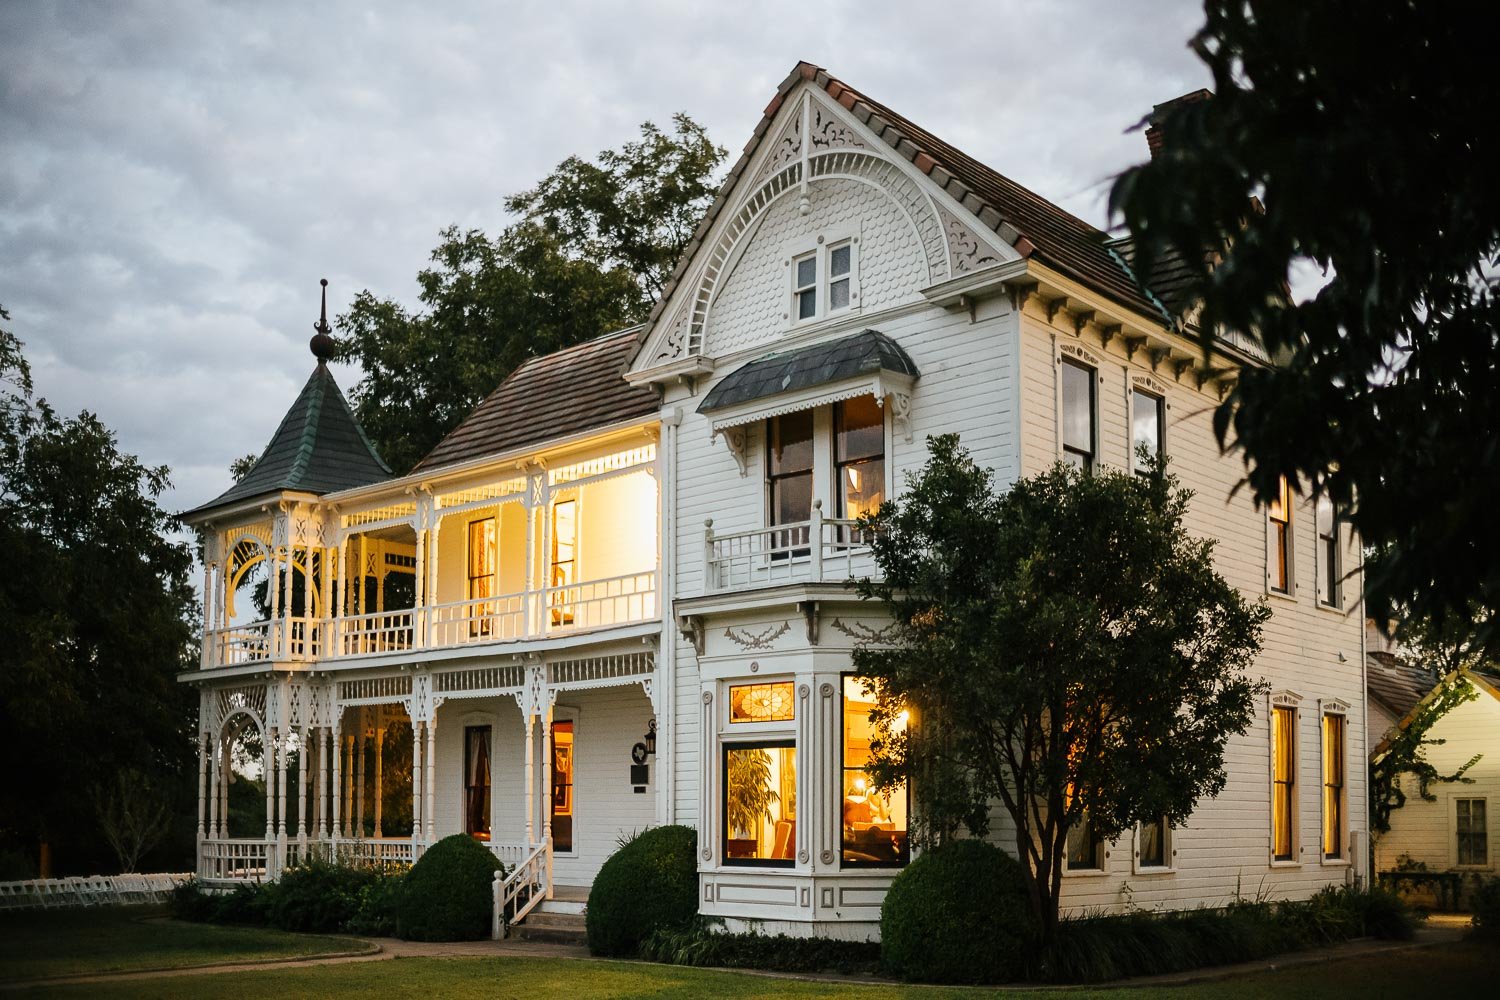 Barr Mansion, Texas after sunset showing front of original building